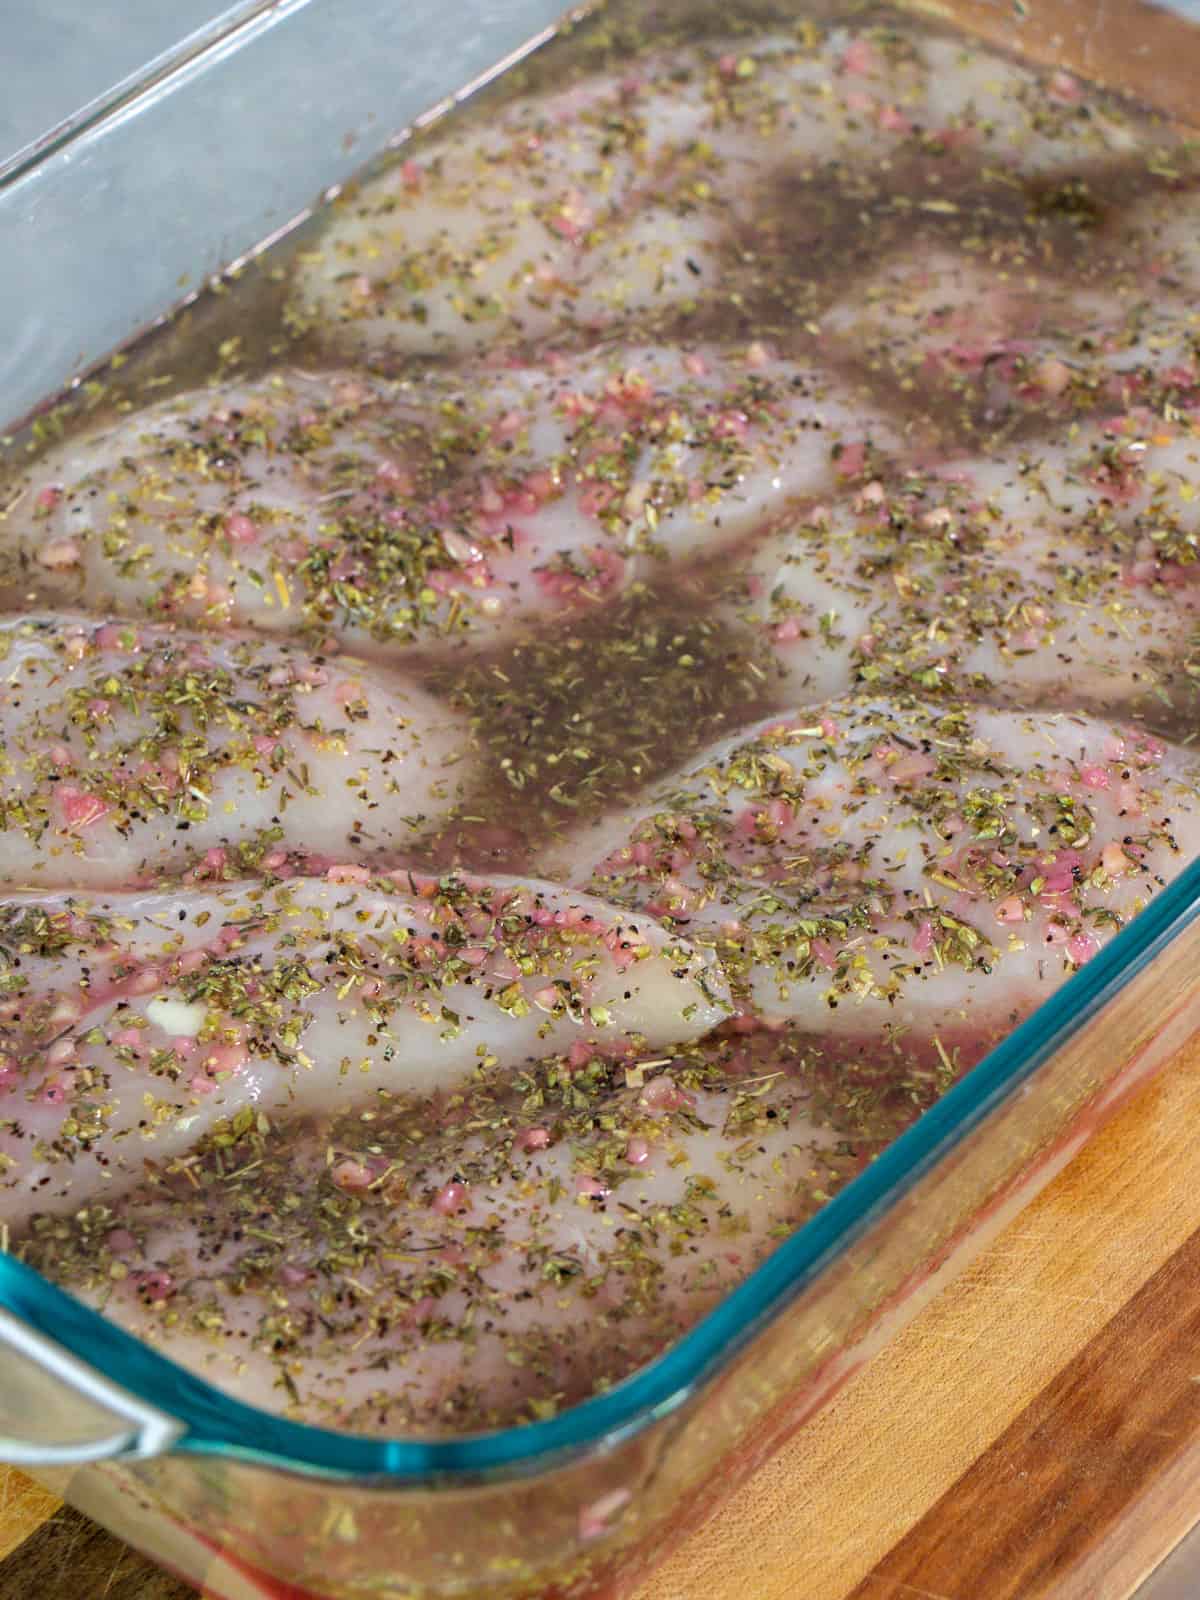 Marinade poured over boneless skinless chicken breasts.